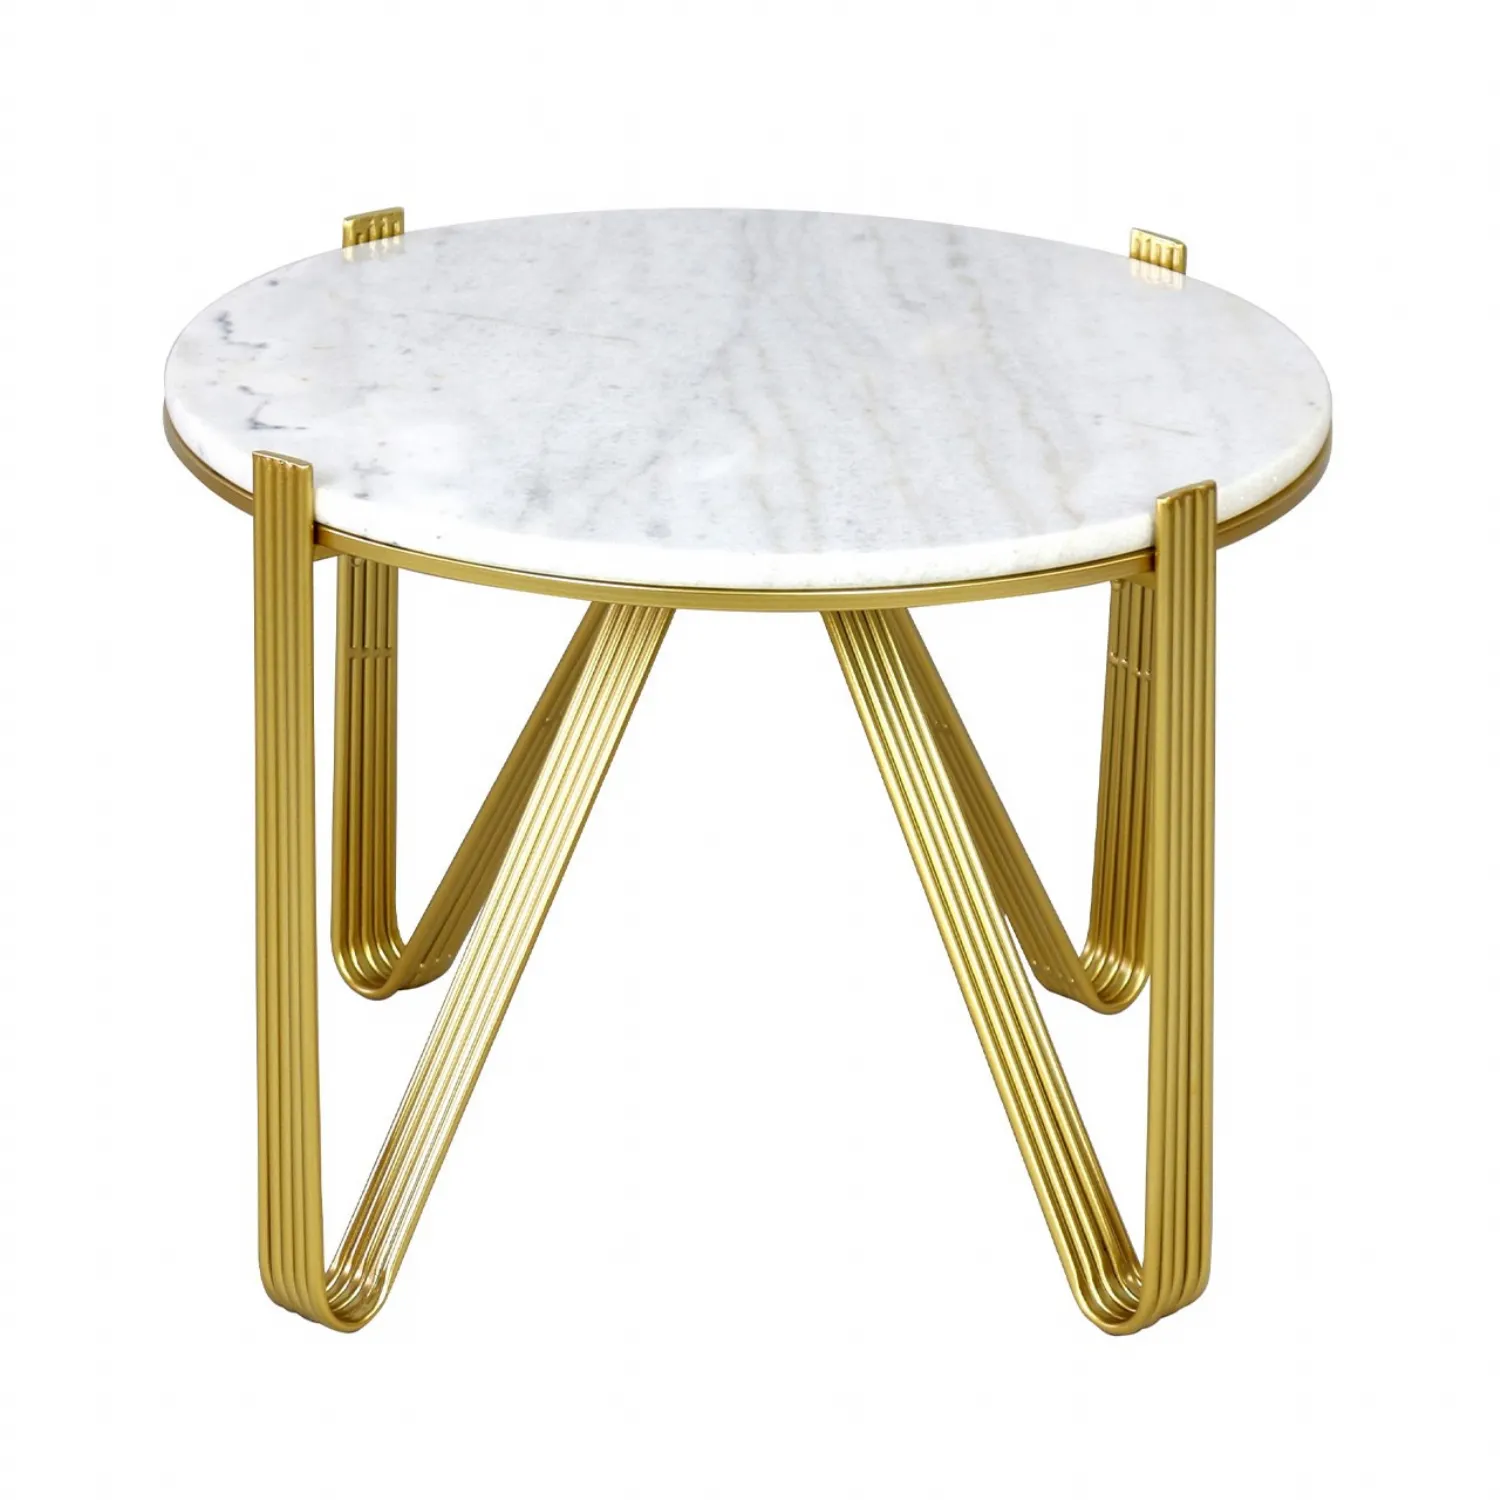 Yohan White Marble With Gold Metal Legs Coffee Table